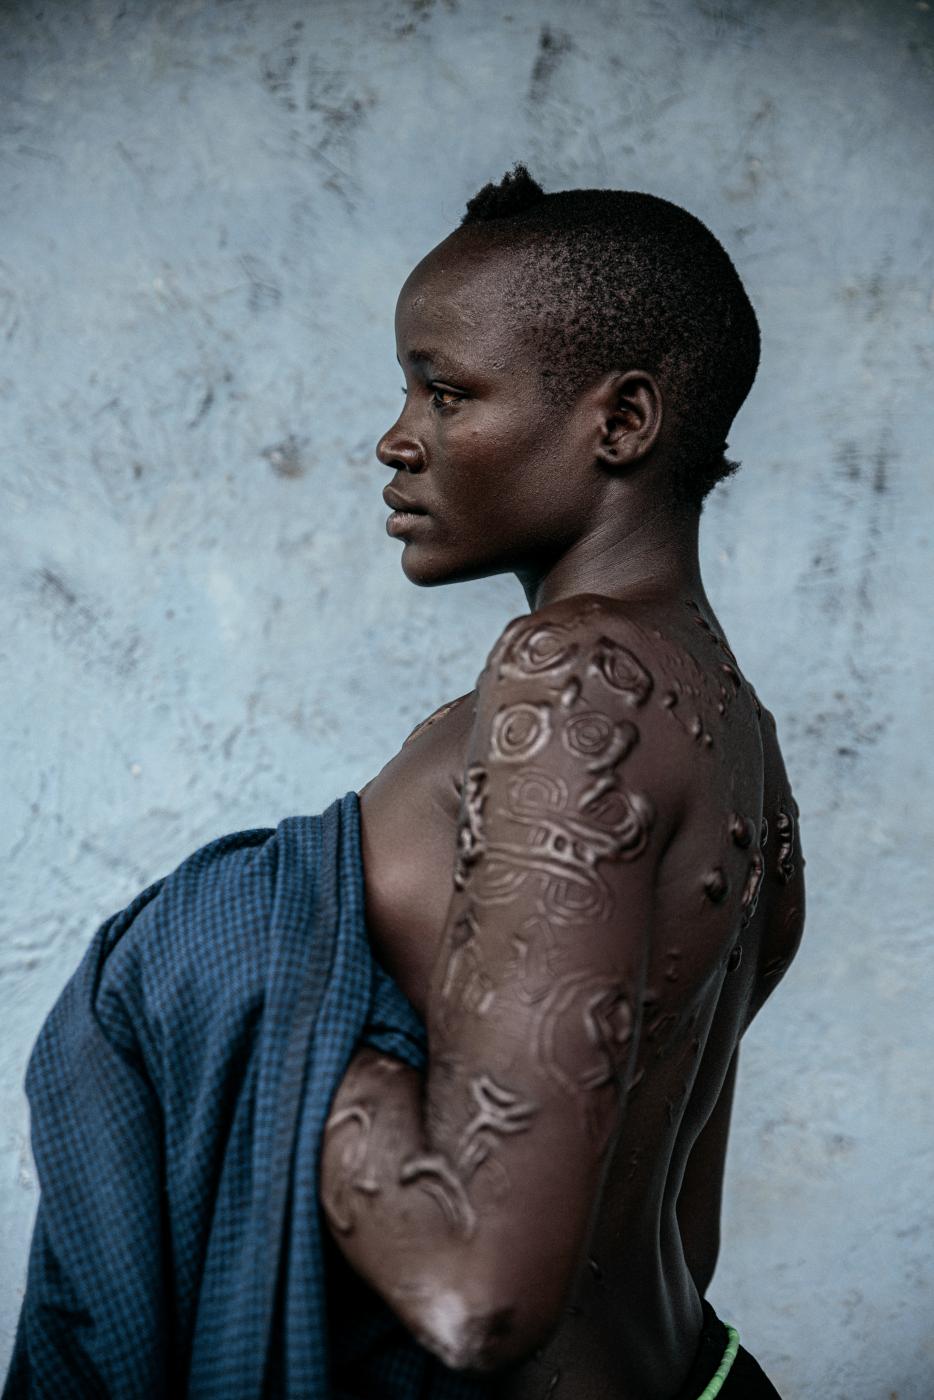 The language of scarifications: A photo essay on the Me'en tribal woman in Ethiopia